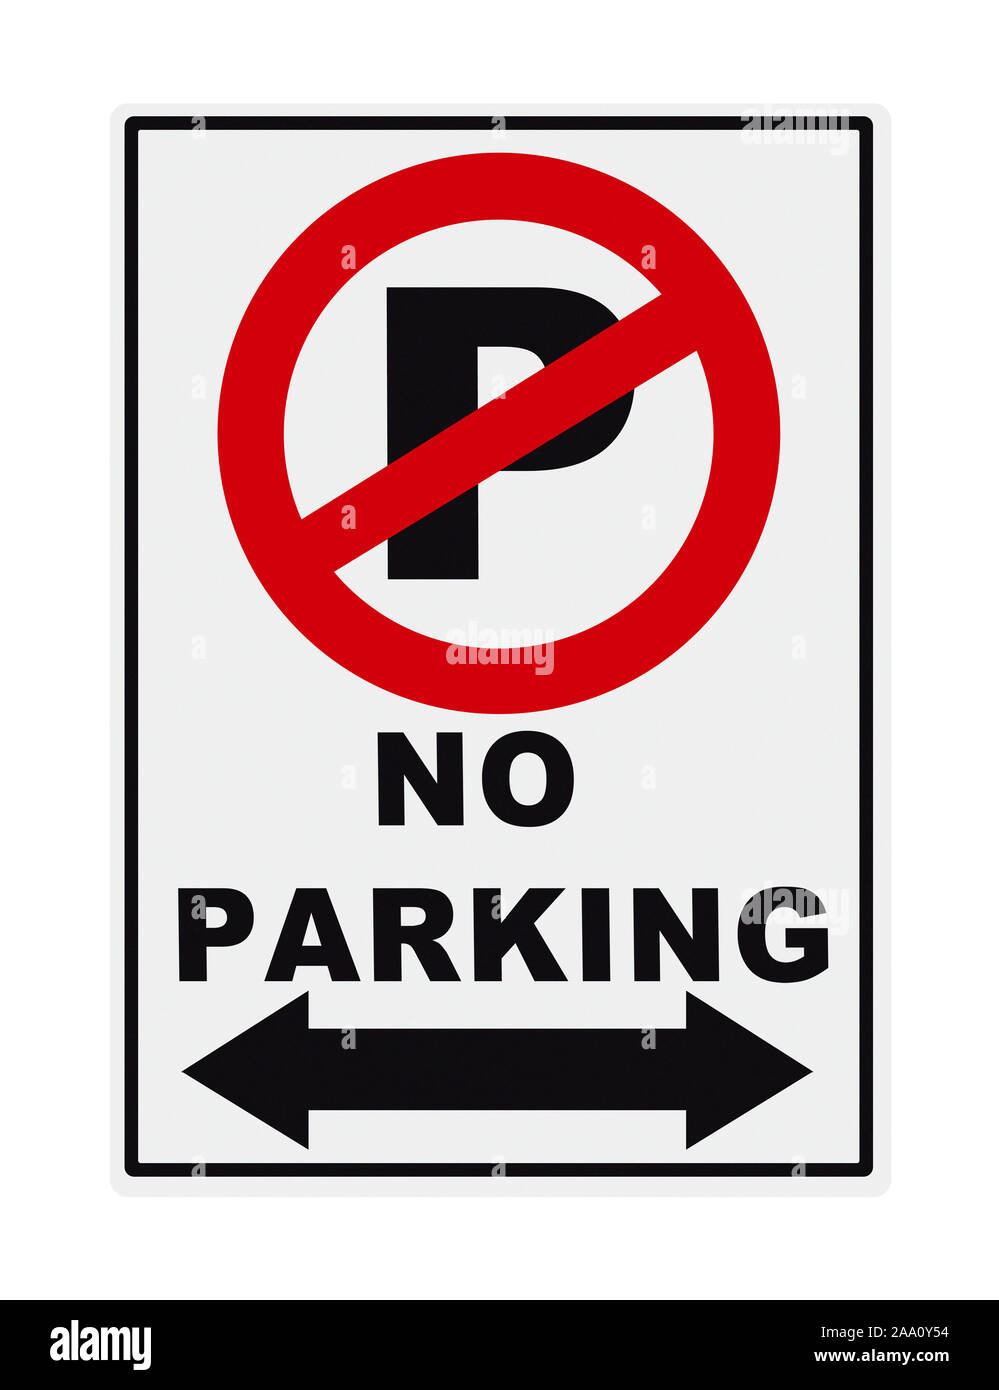 No Parking Metal Sign Isolated on White Background. Stock Photo